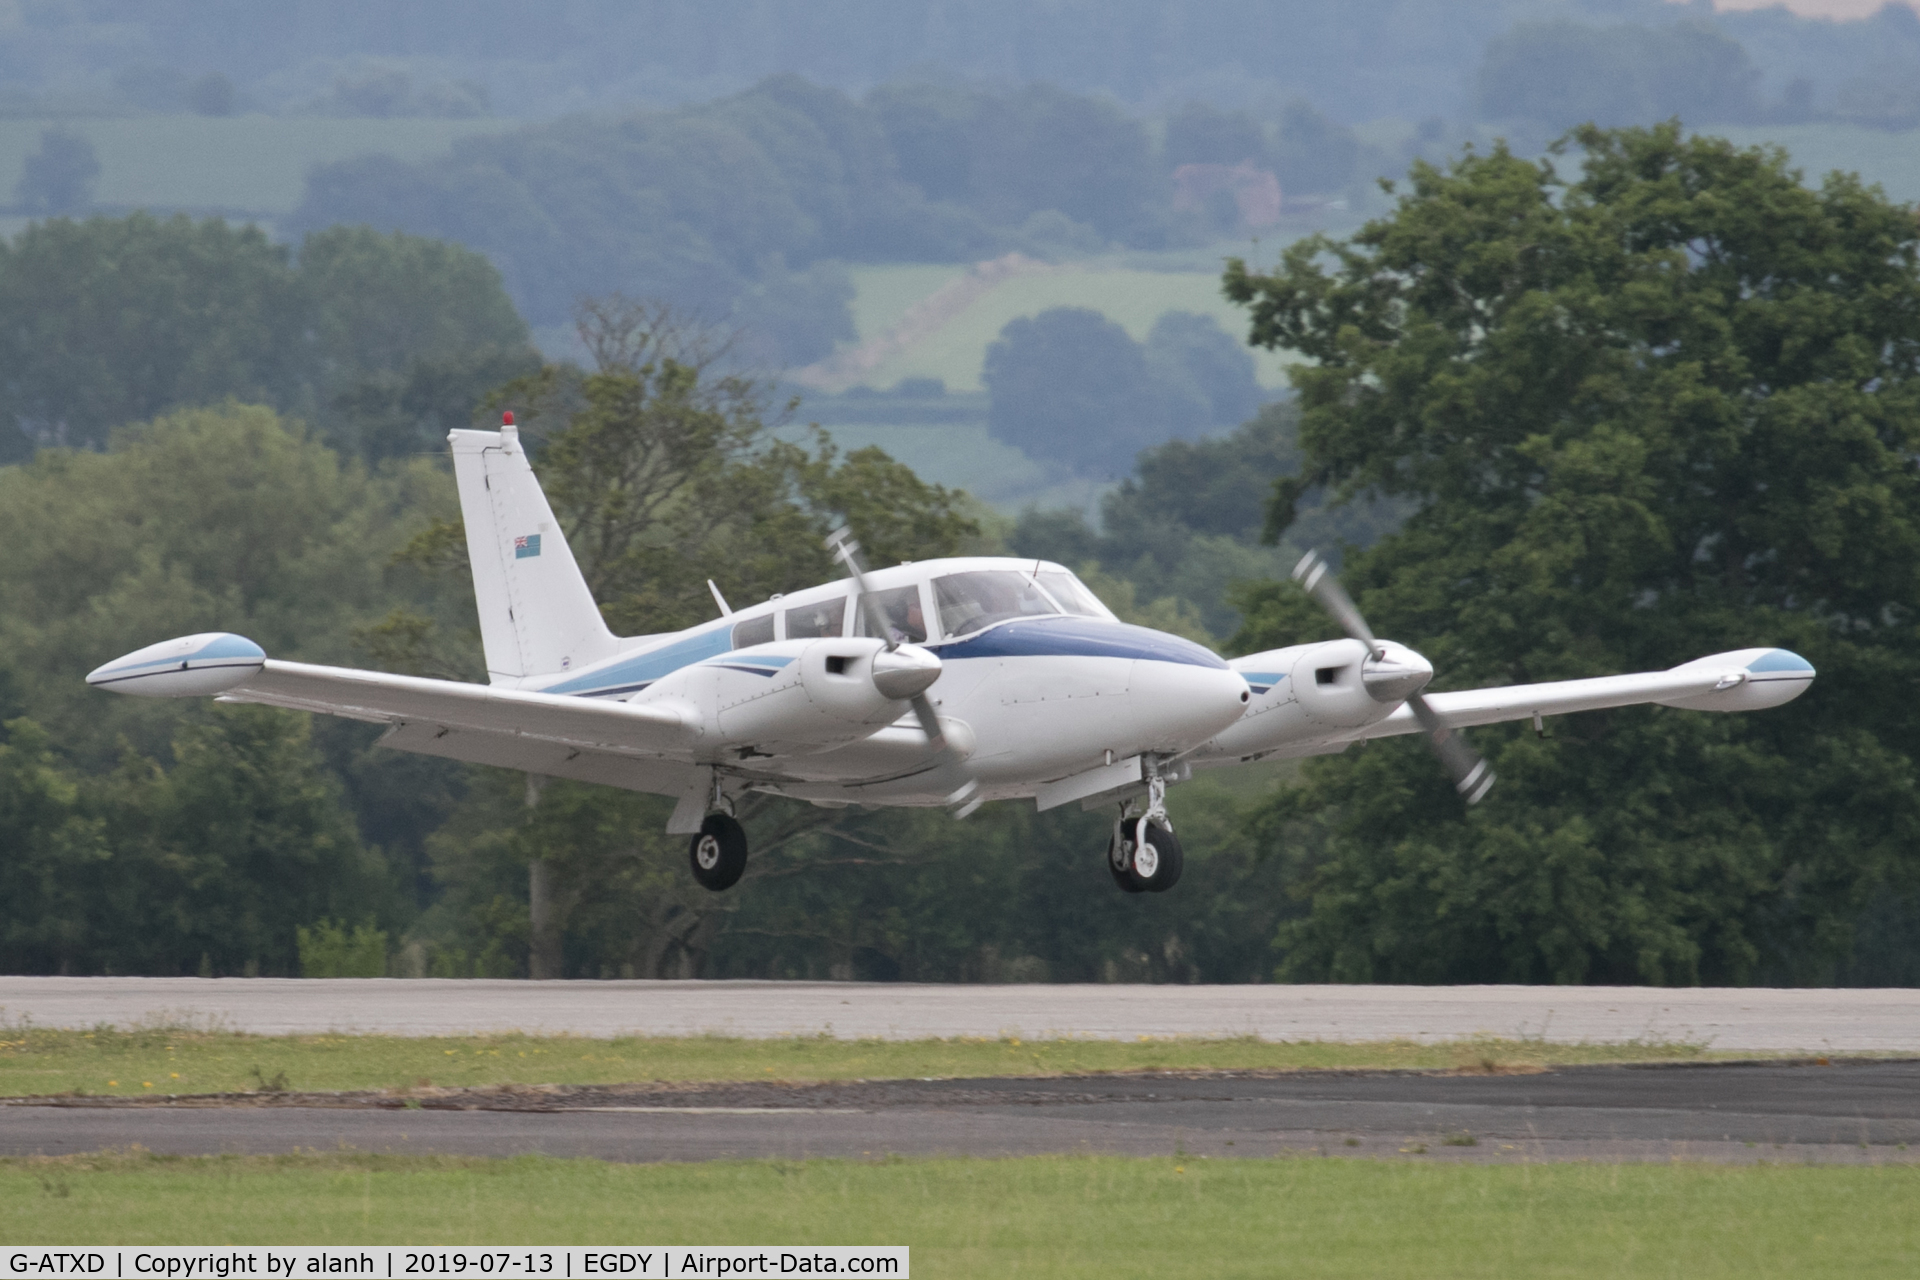 G-ATXD, 1966 Piper PA-30-160 B Twin Comanche C/N 30-1166, Arriving as a visitor at RNAS Yeovilton Air Day 2019